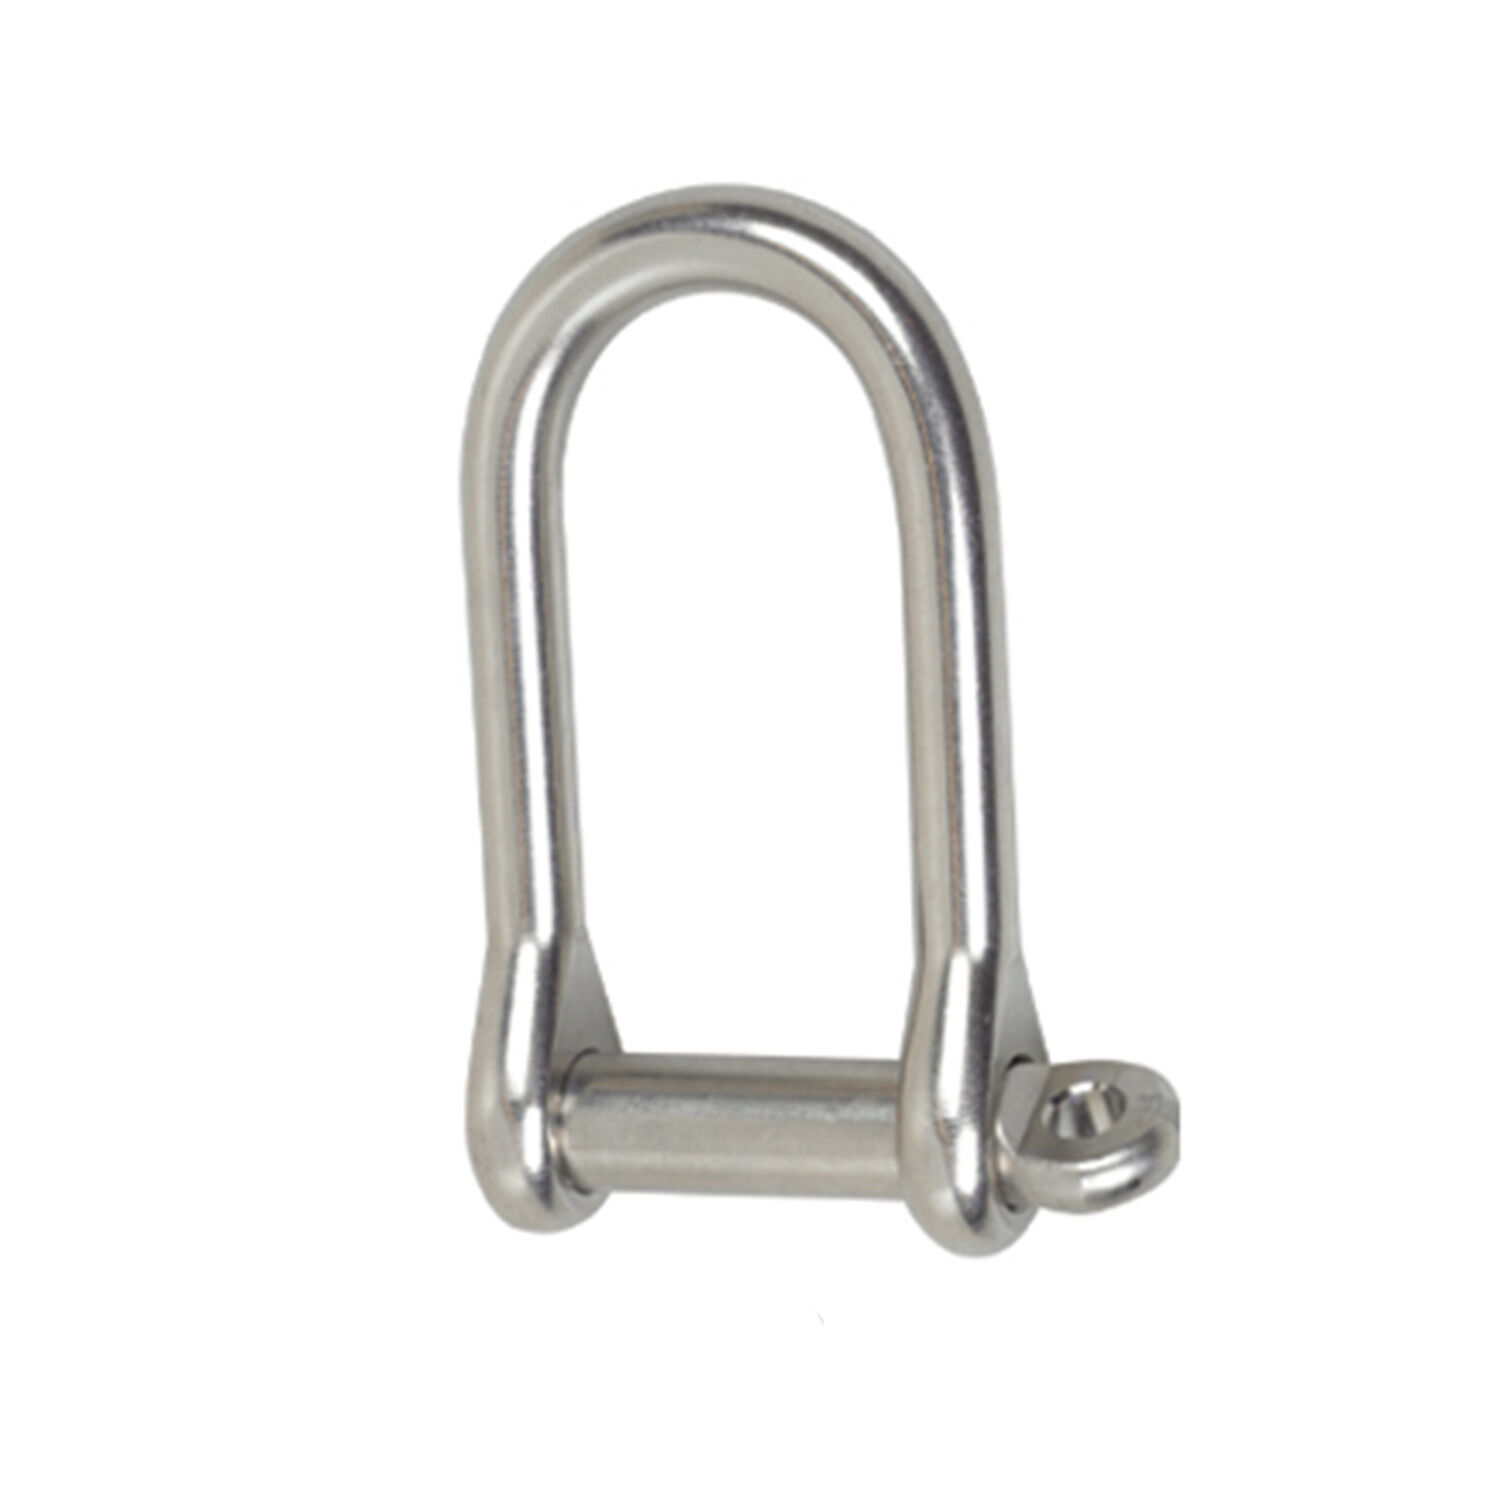 Dee Shackles D Shackle 2 x 5mm Wide Jaw Marine Stainless Steel Handy Straps 